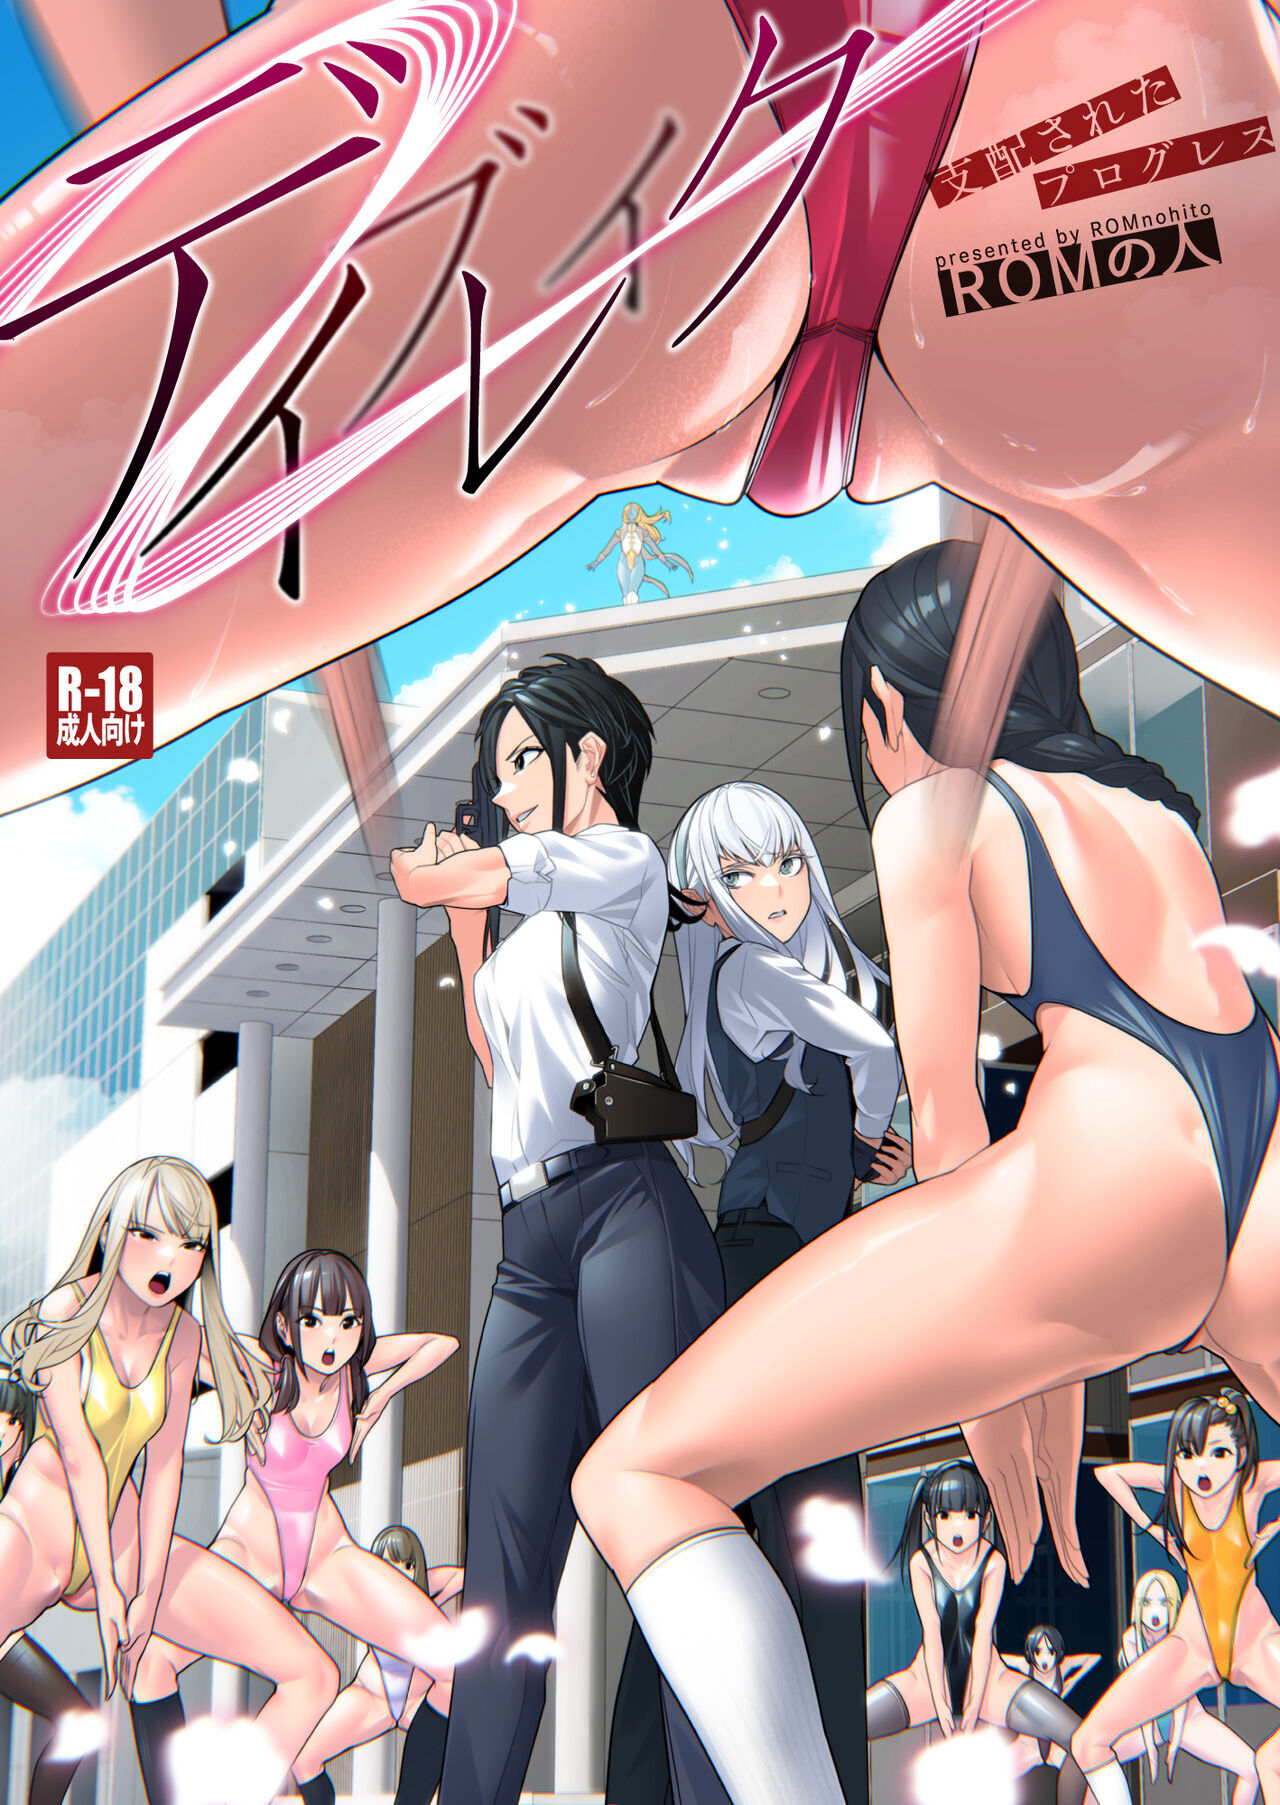 Sex Toys Hentai Manga - Sex Toys - sorted by number of objects - Free Hentai